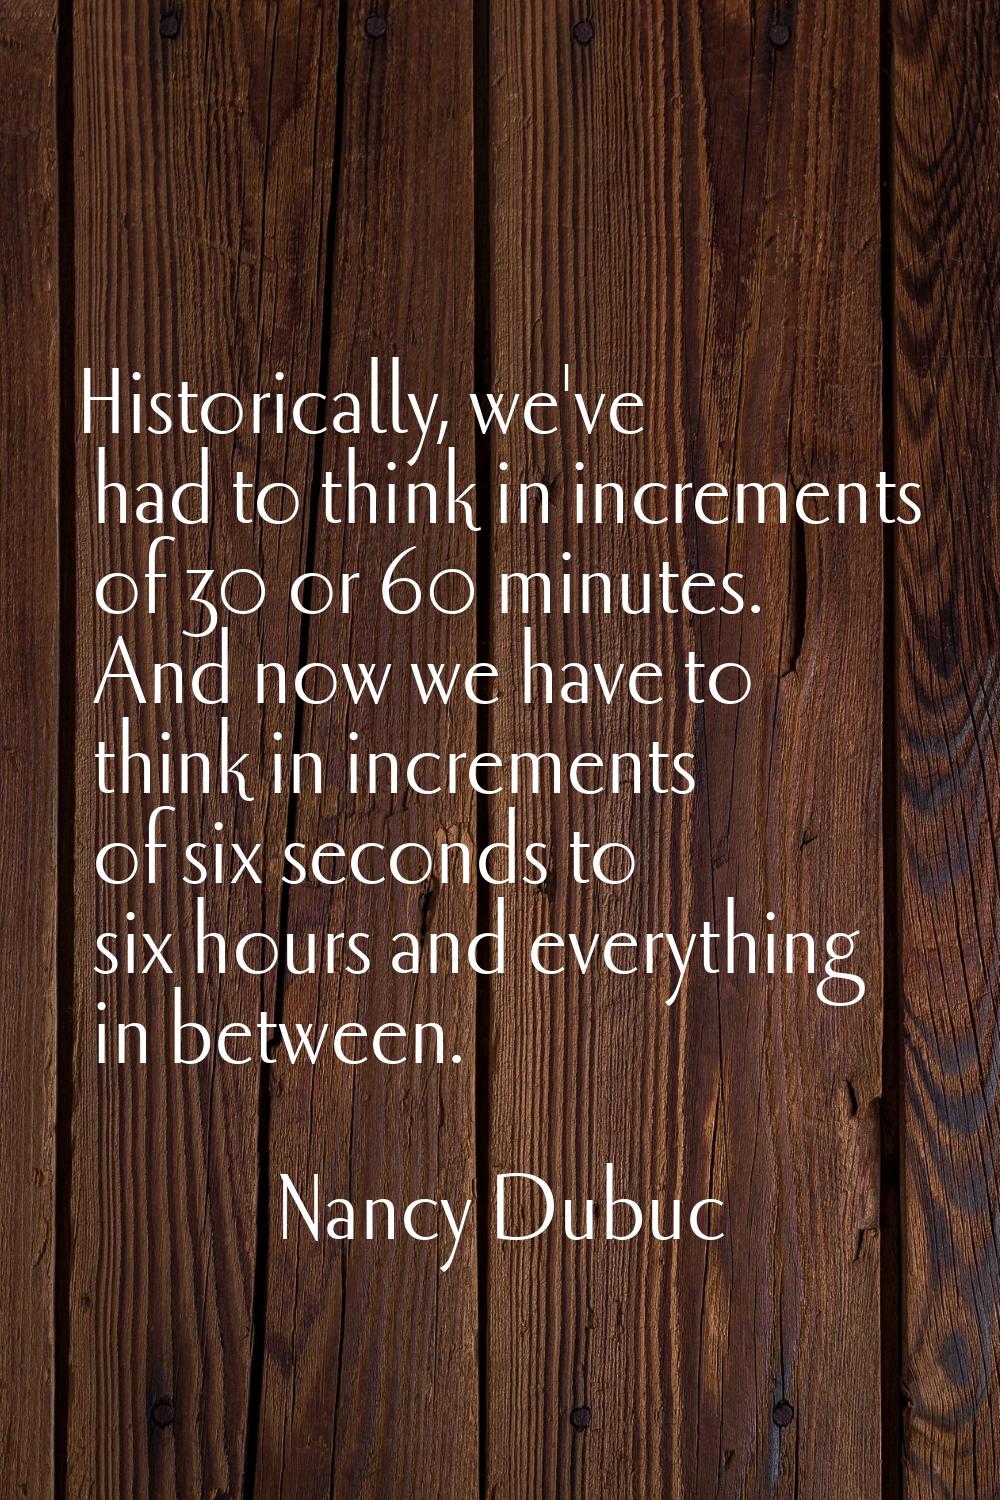 Historically, we've had to think in increments of 30 or 60 minutes. And now we have to think in inc